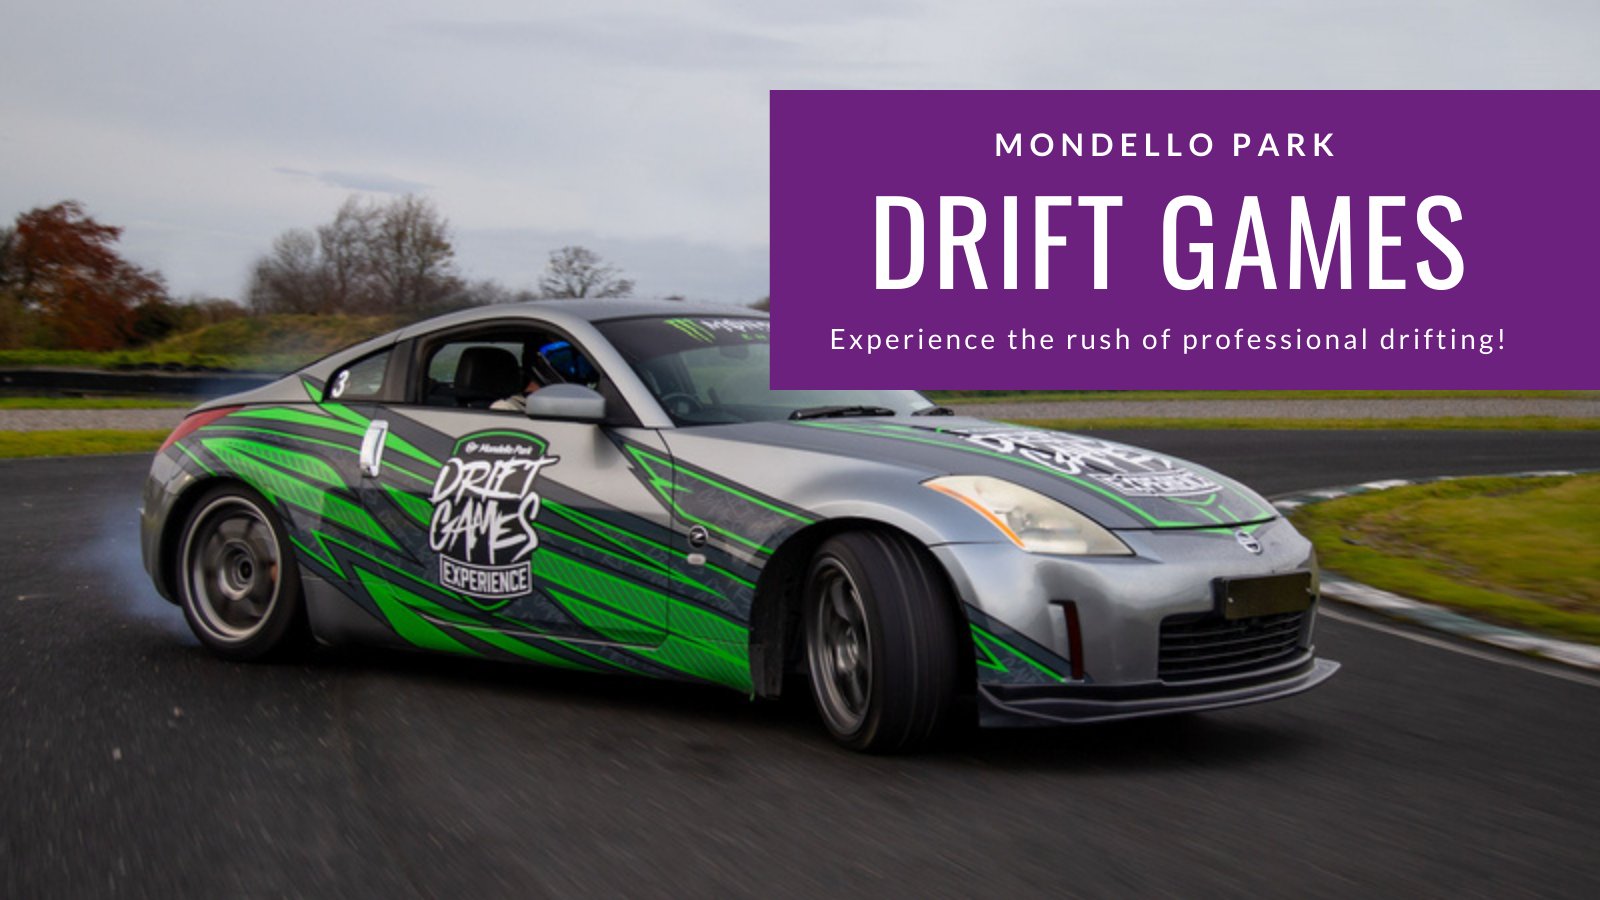 Drifted Games